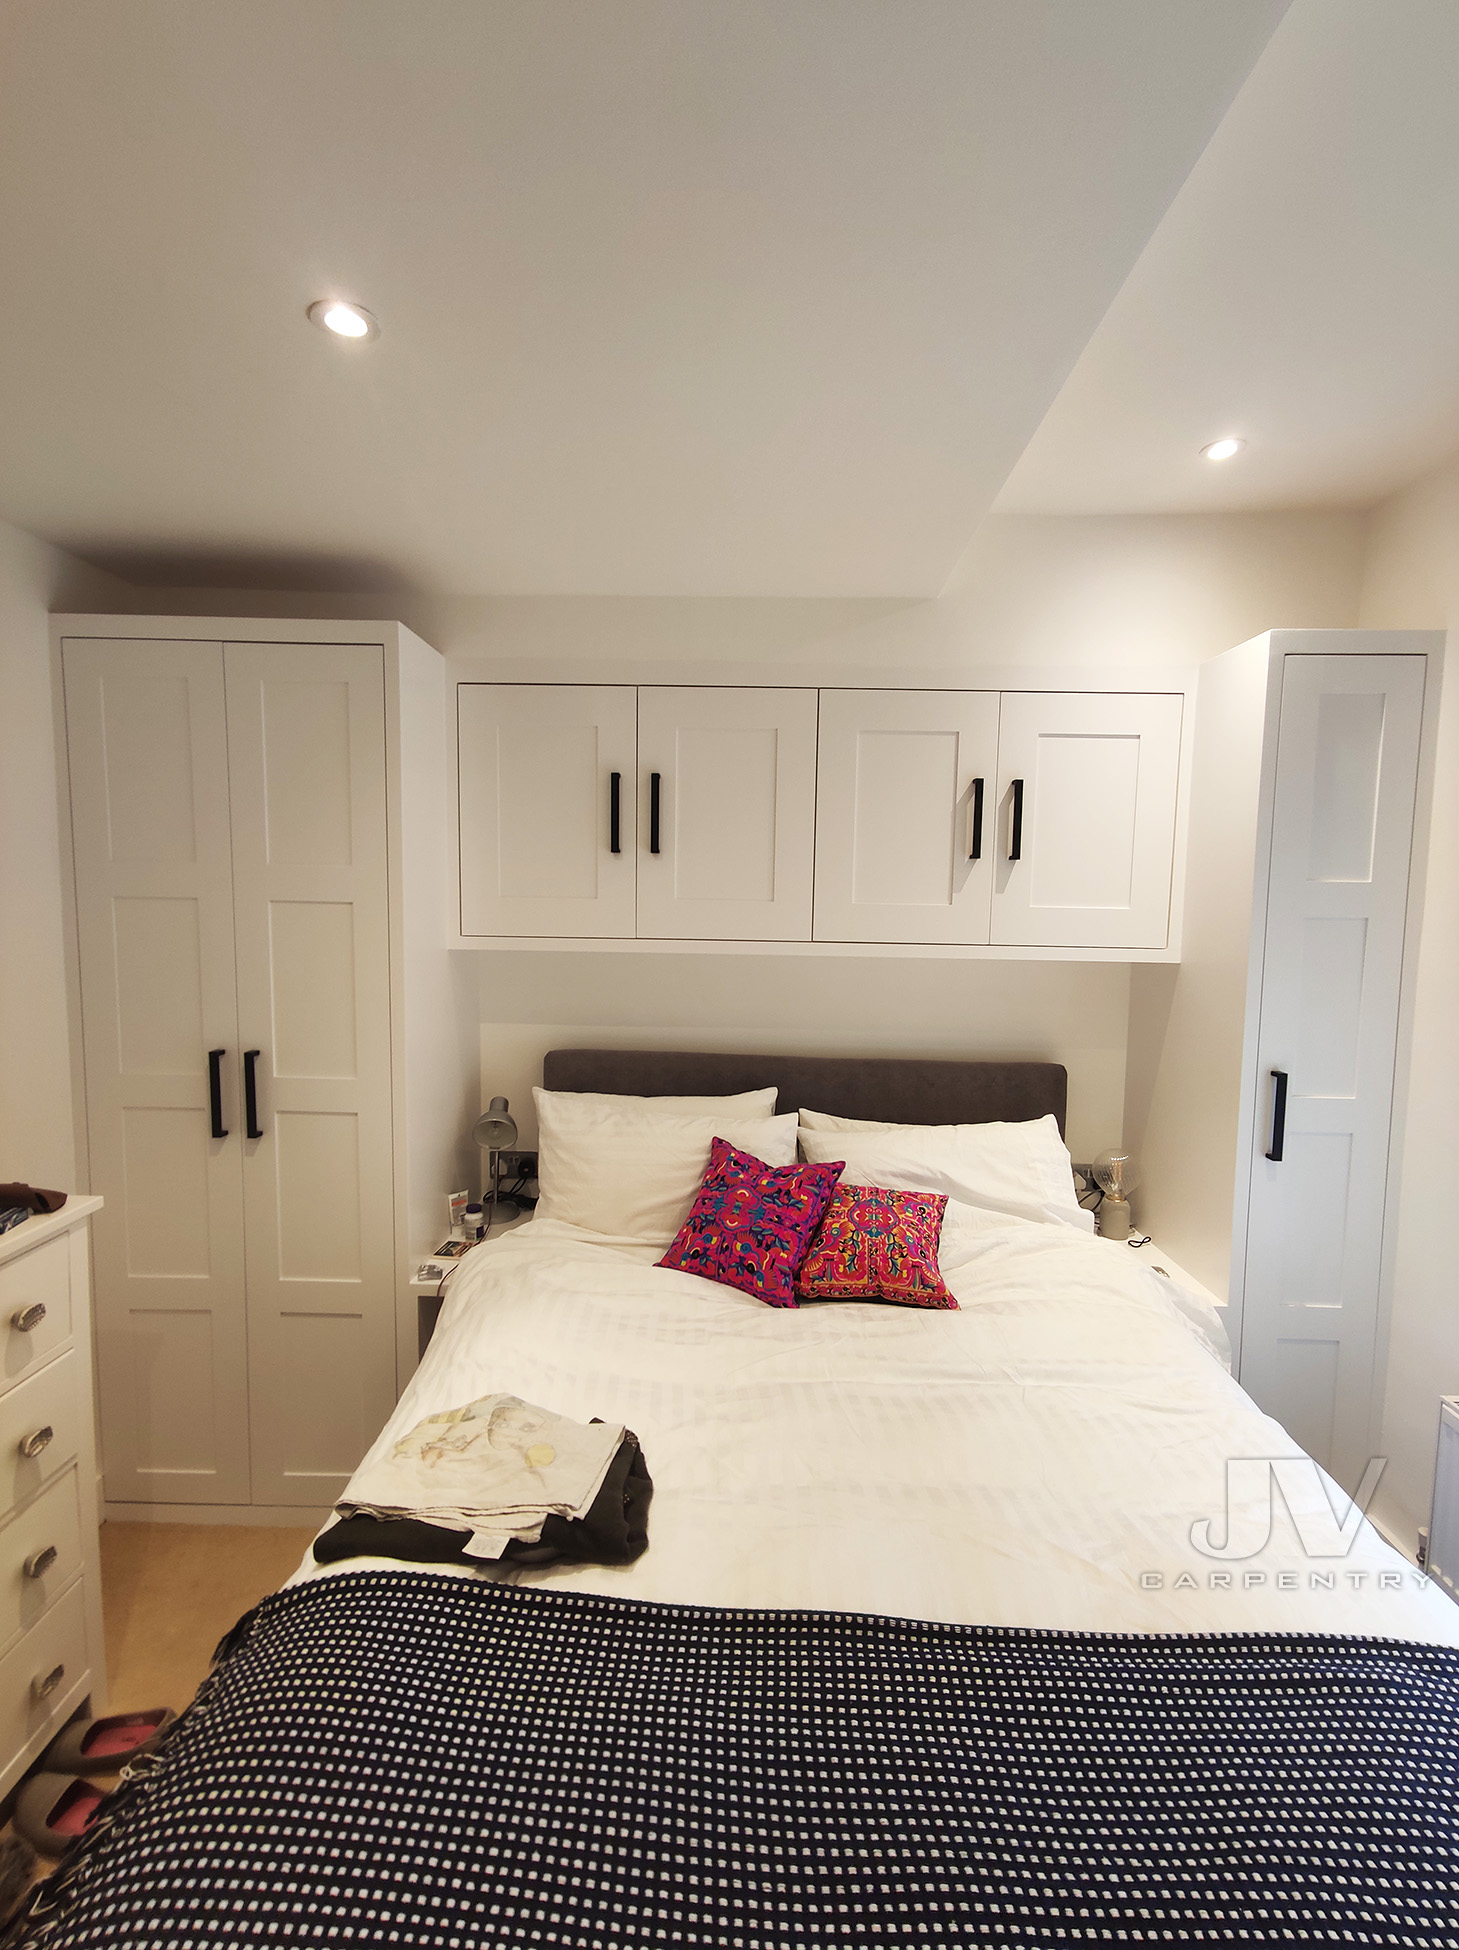 wardrobe with over the bed cupboards